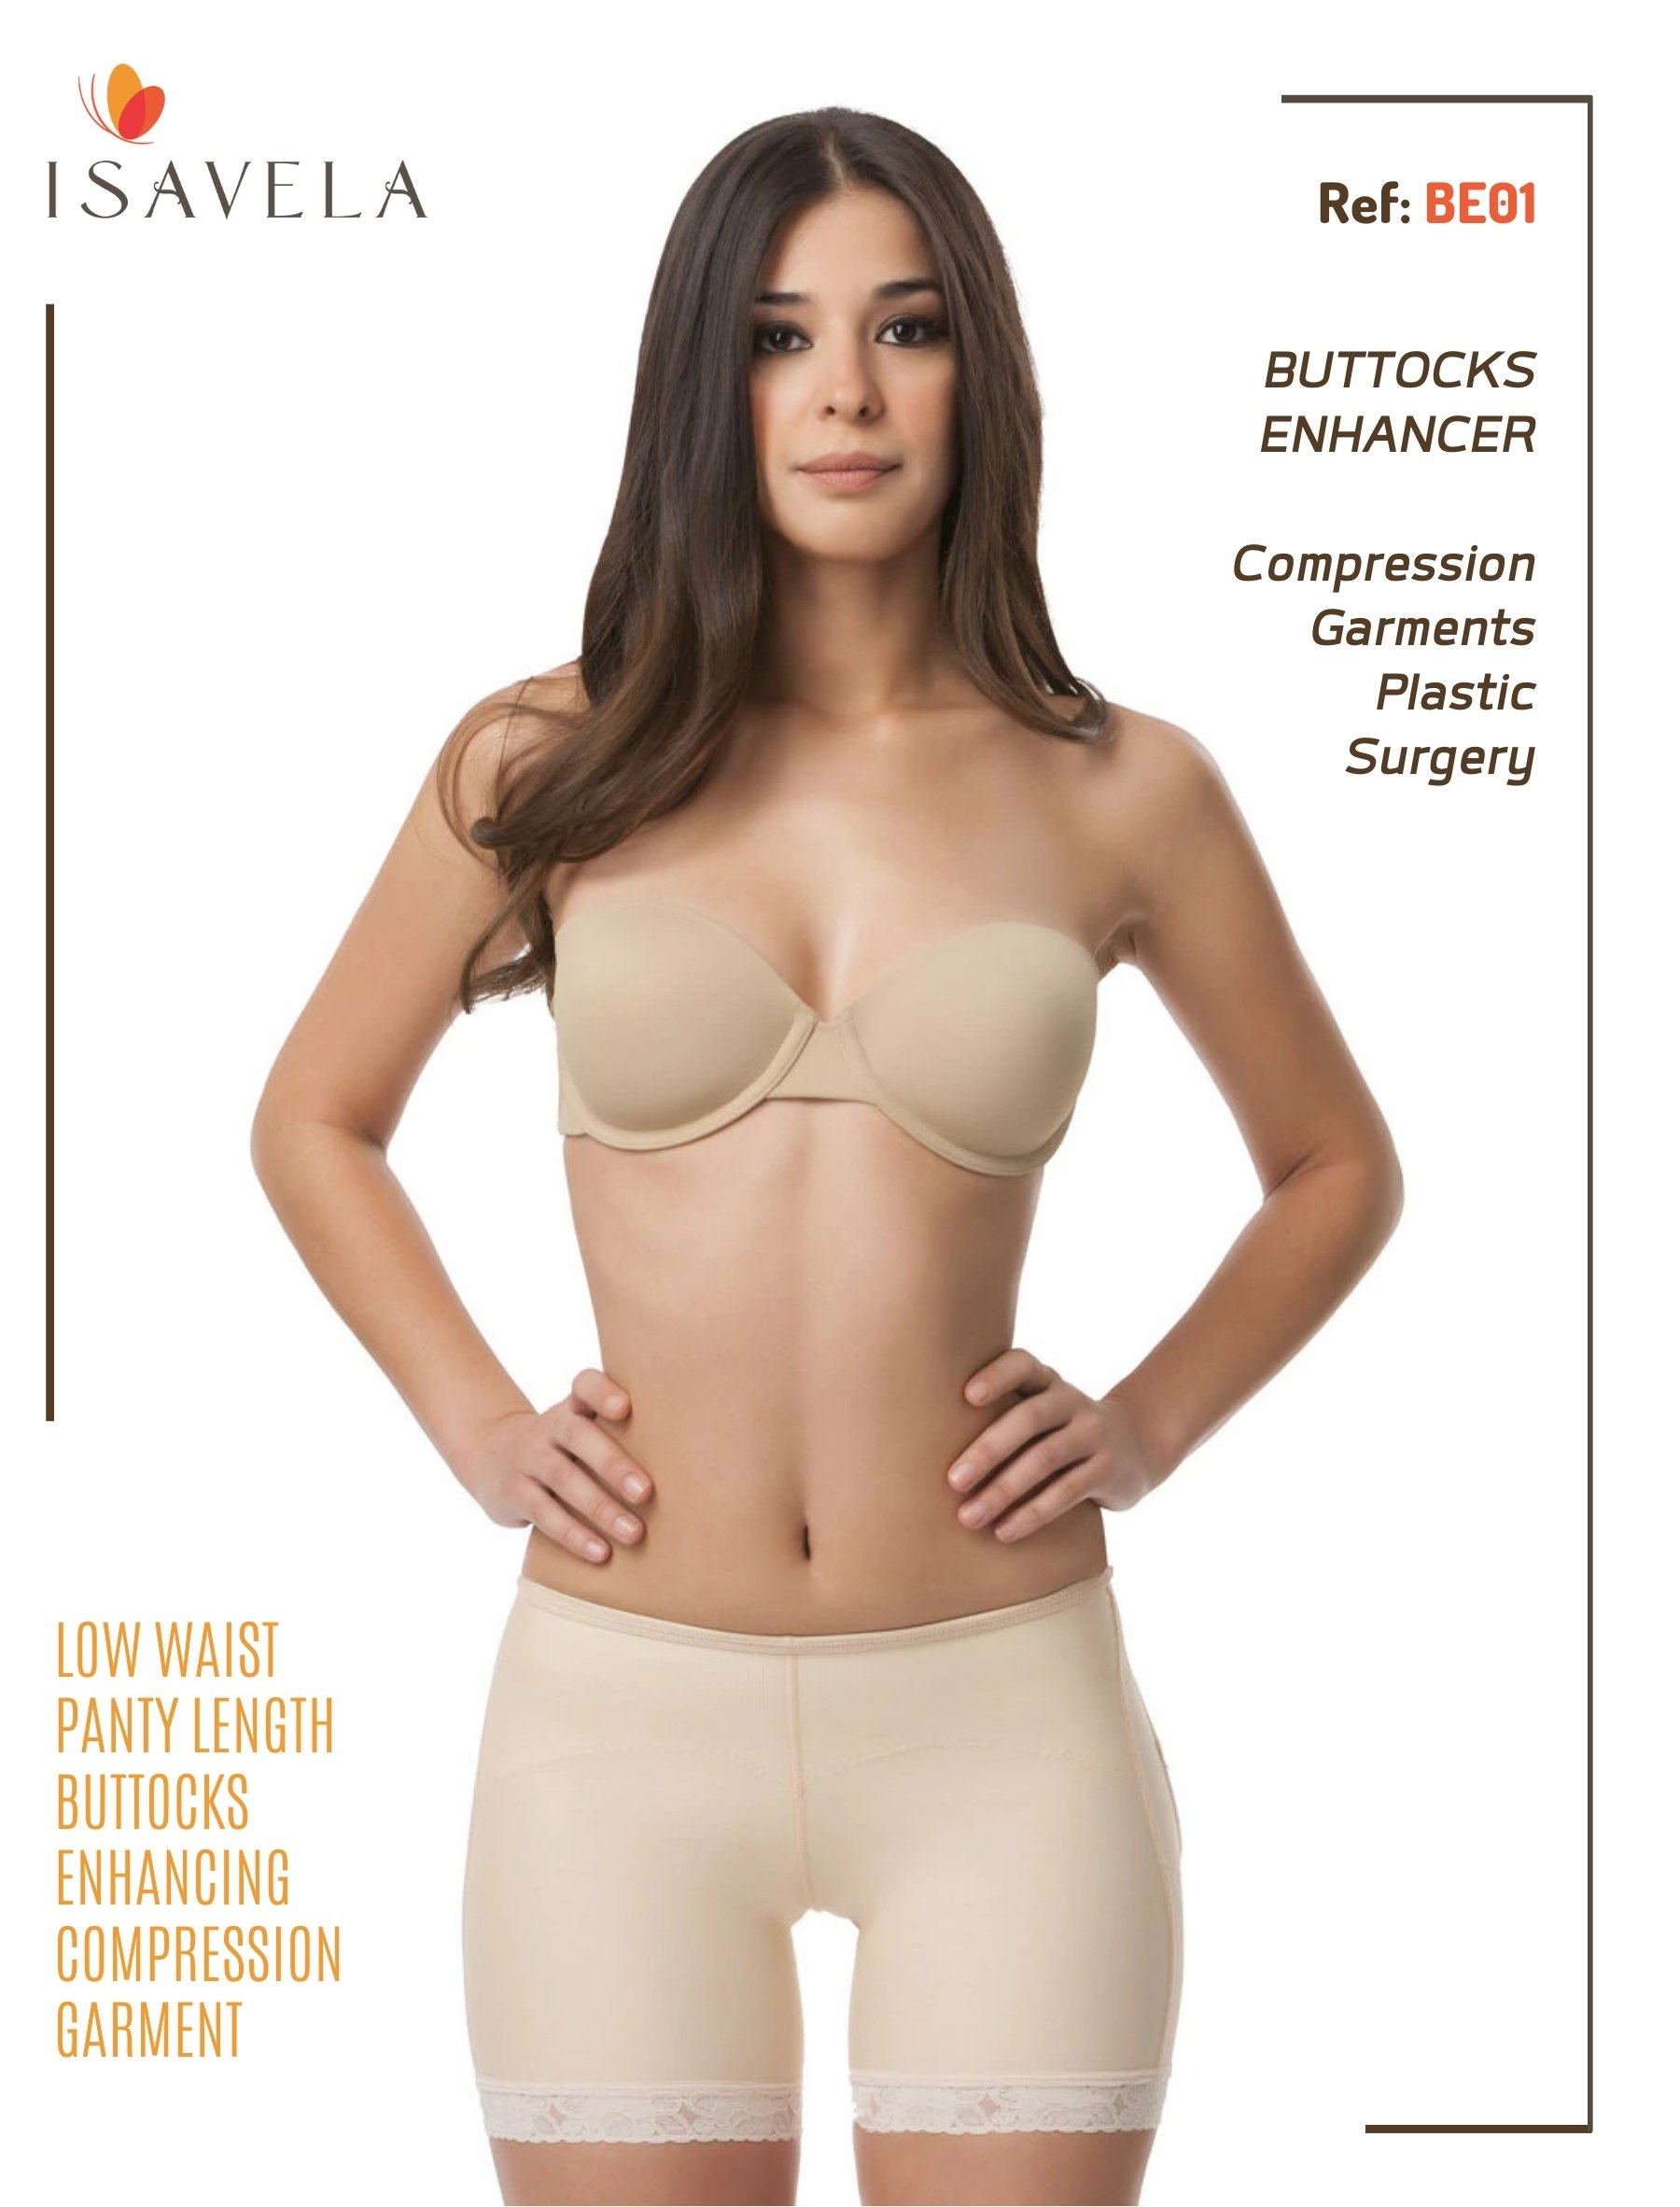 Low Waist Panty Length Buttocks Enhancing Compression Garment (BE01)